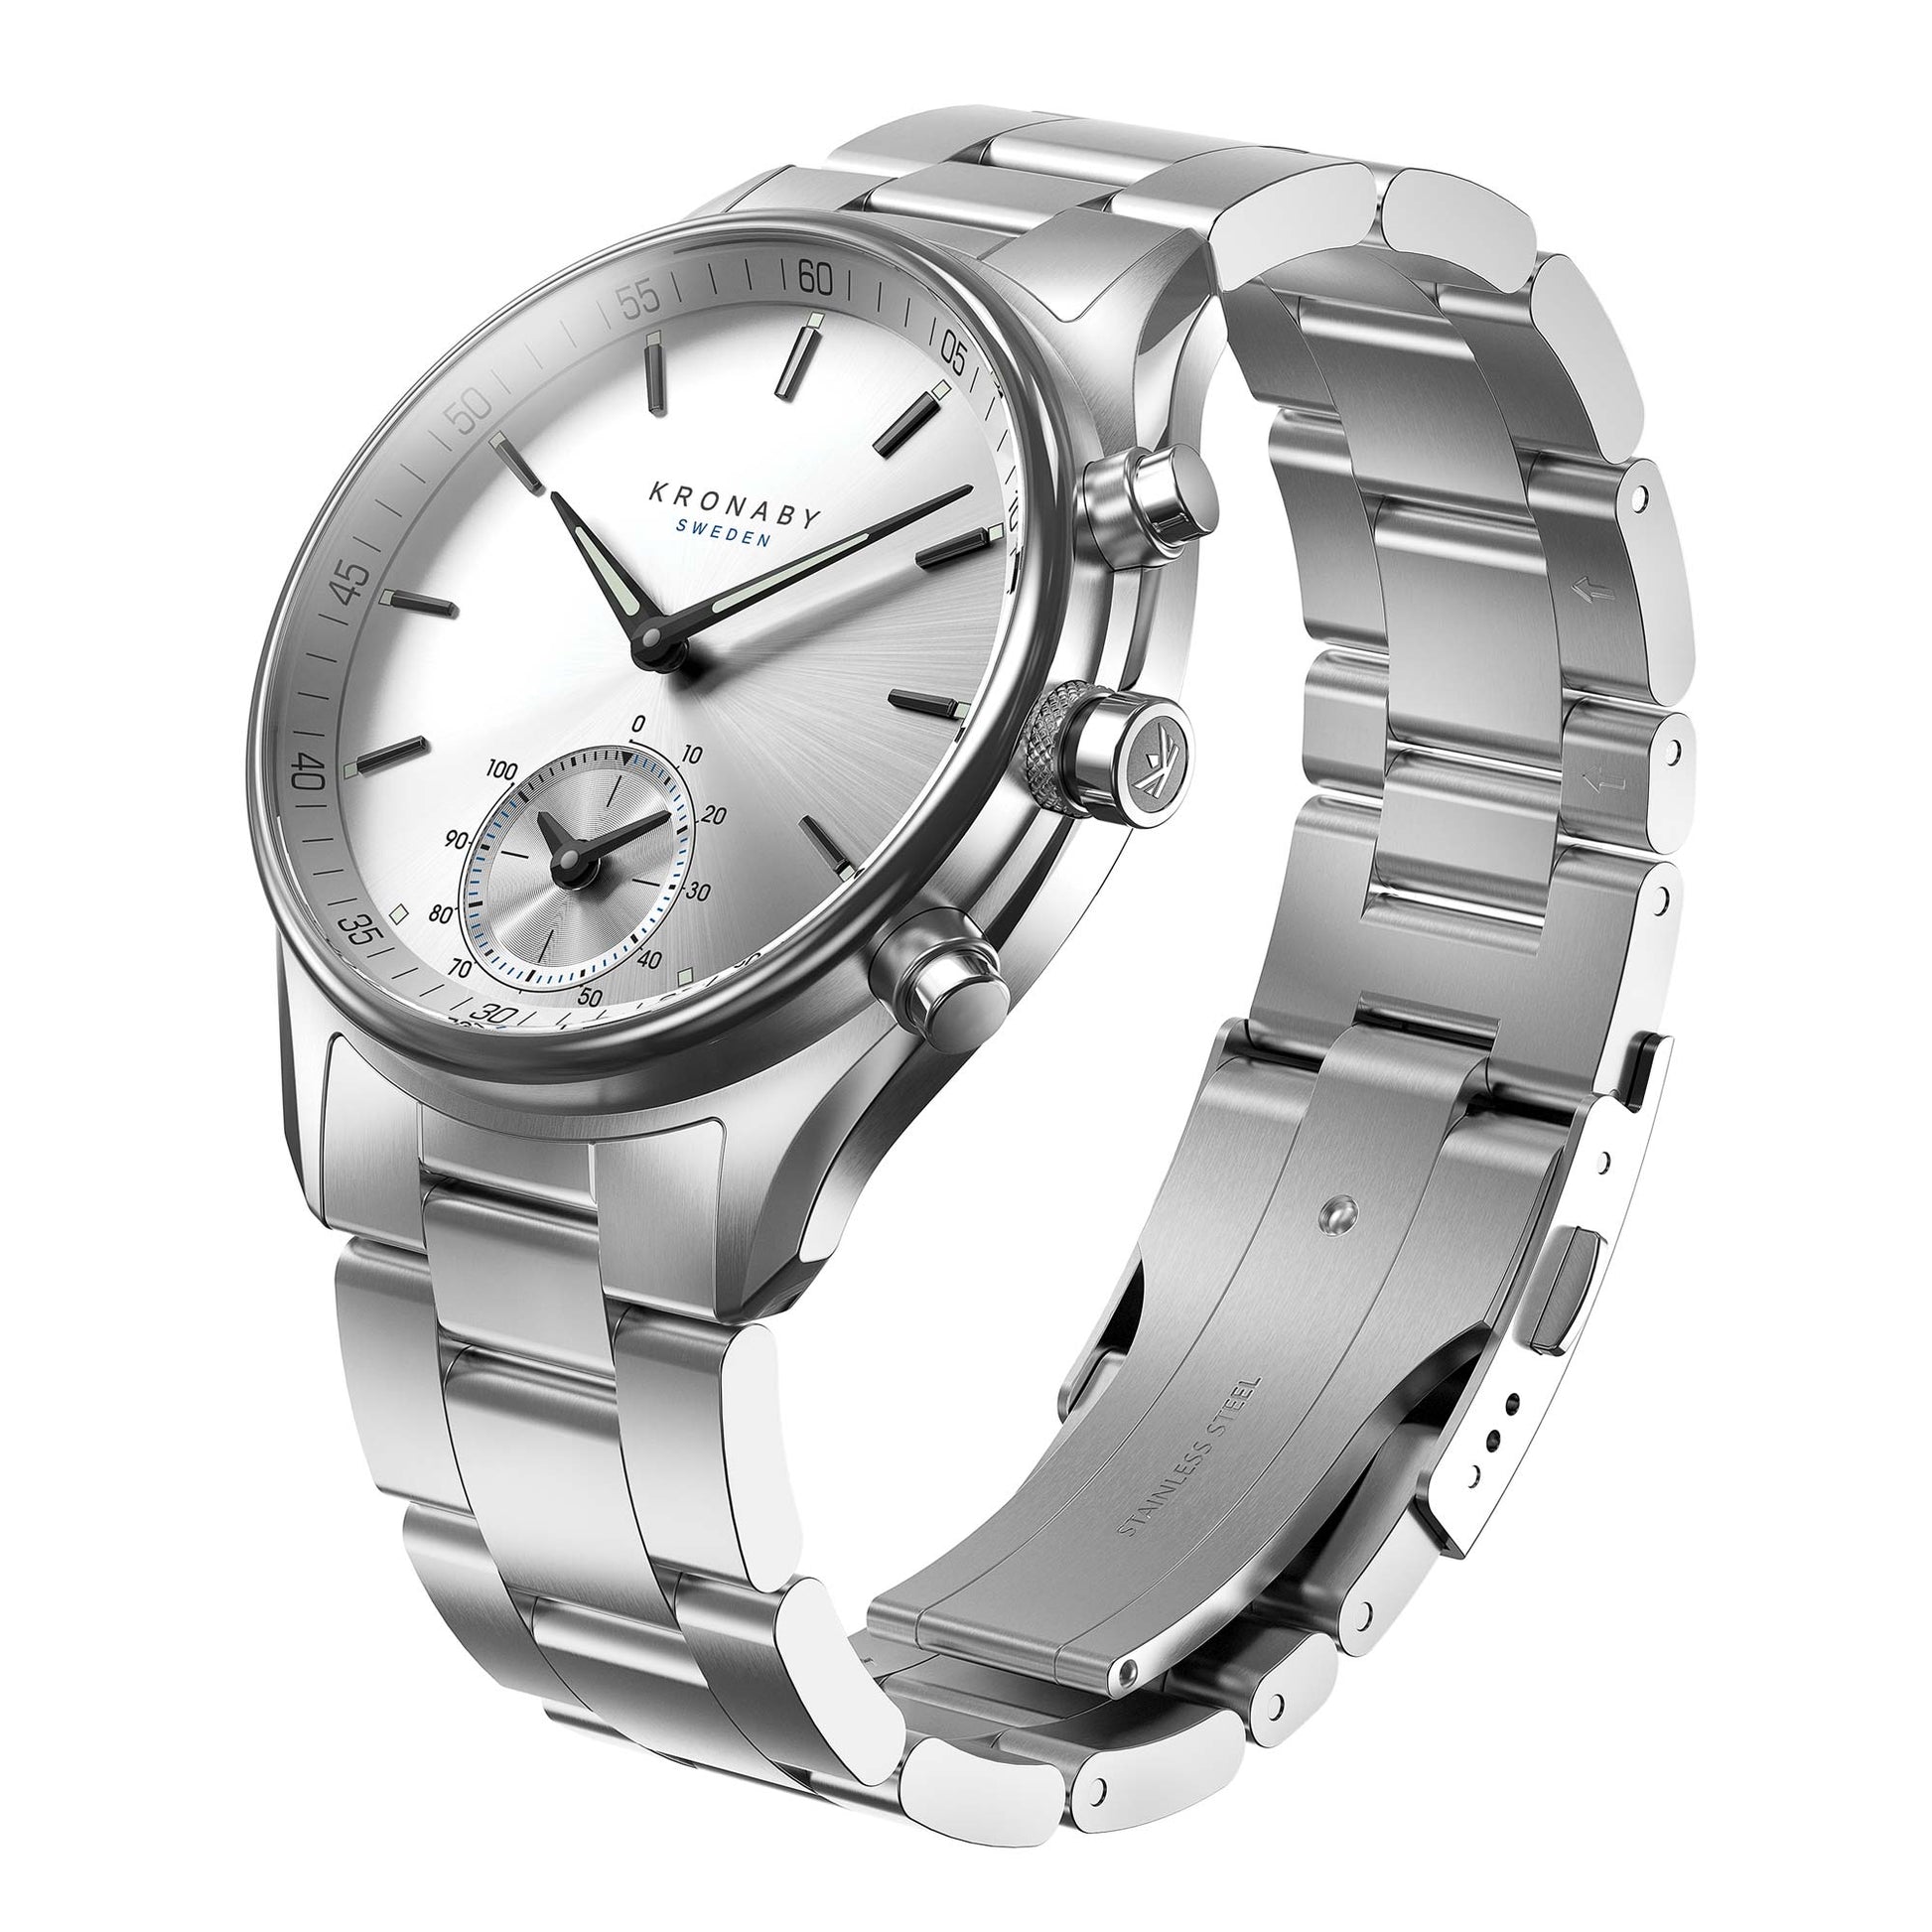 Kronaby Sekel Connected Watch - Watches - Mens